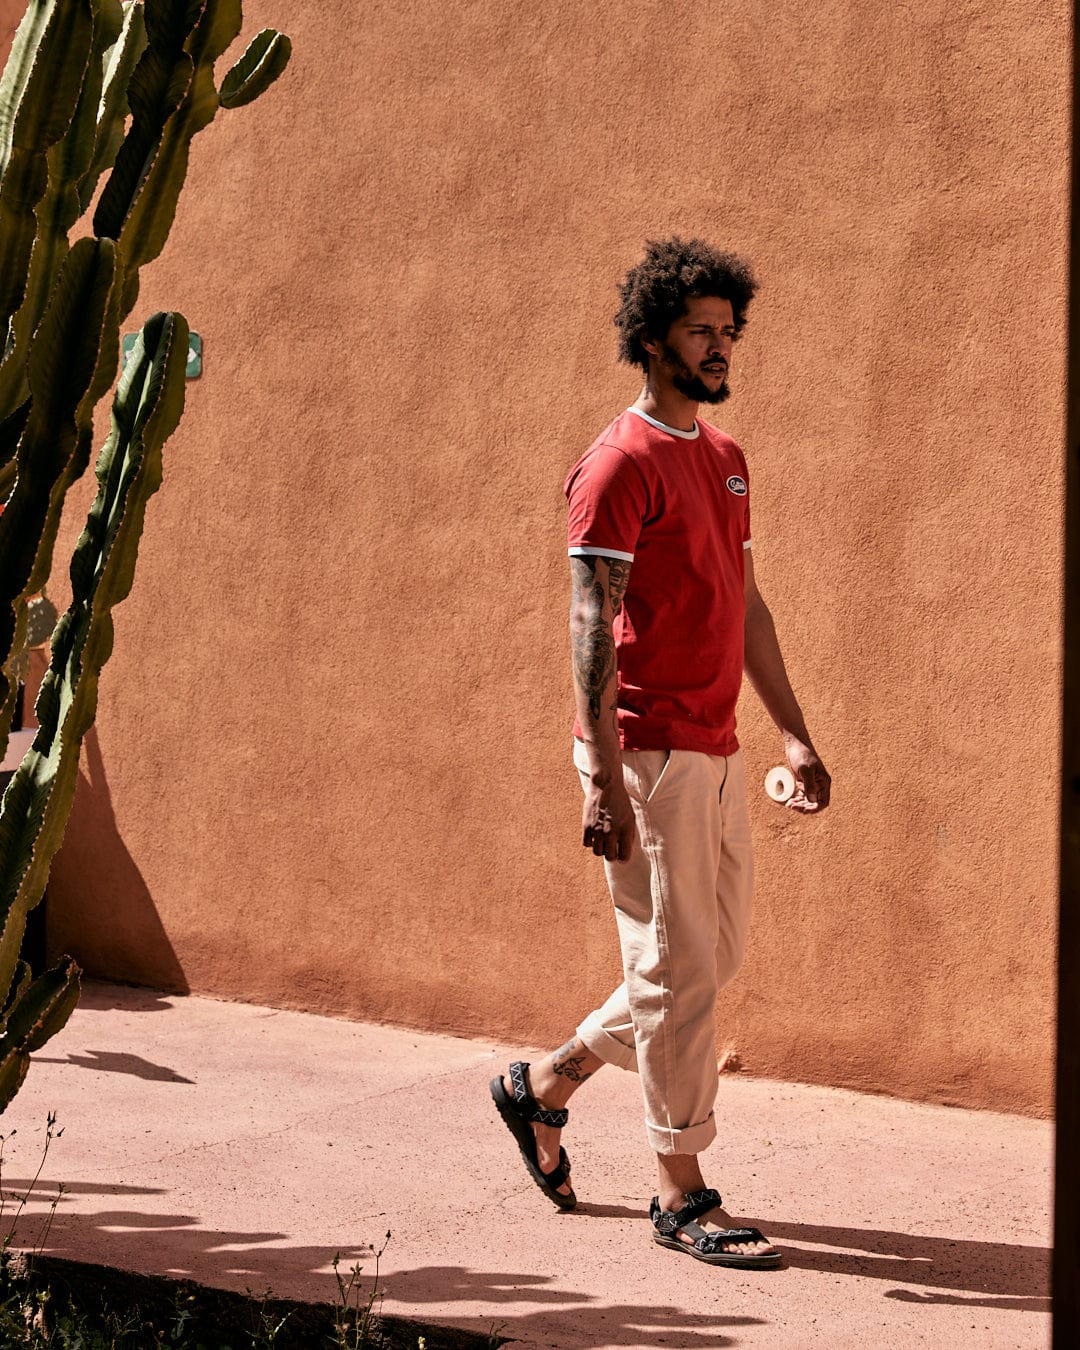 A man with curly hair walking past a cactus, wearing a 100% cotton red Striker Ringer t-shirt with Saltrock embroidered branding, beige trousers, and sandals against an earthy wall.